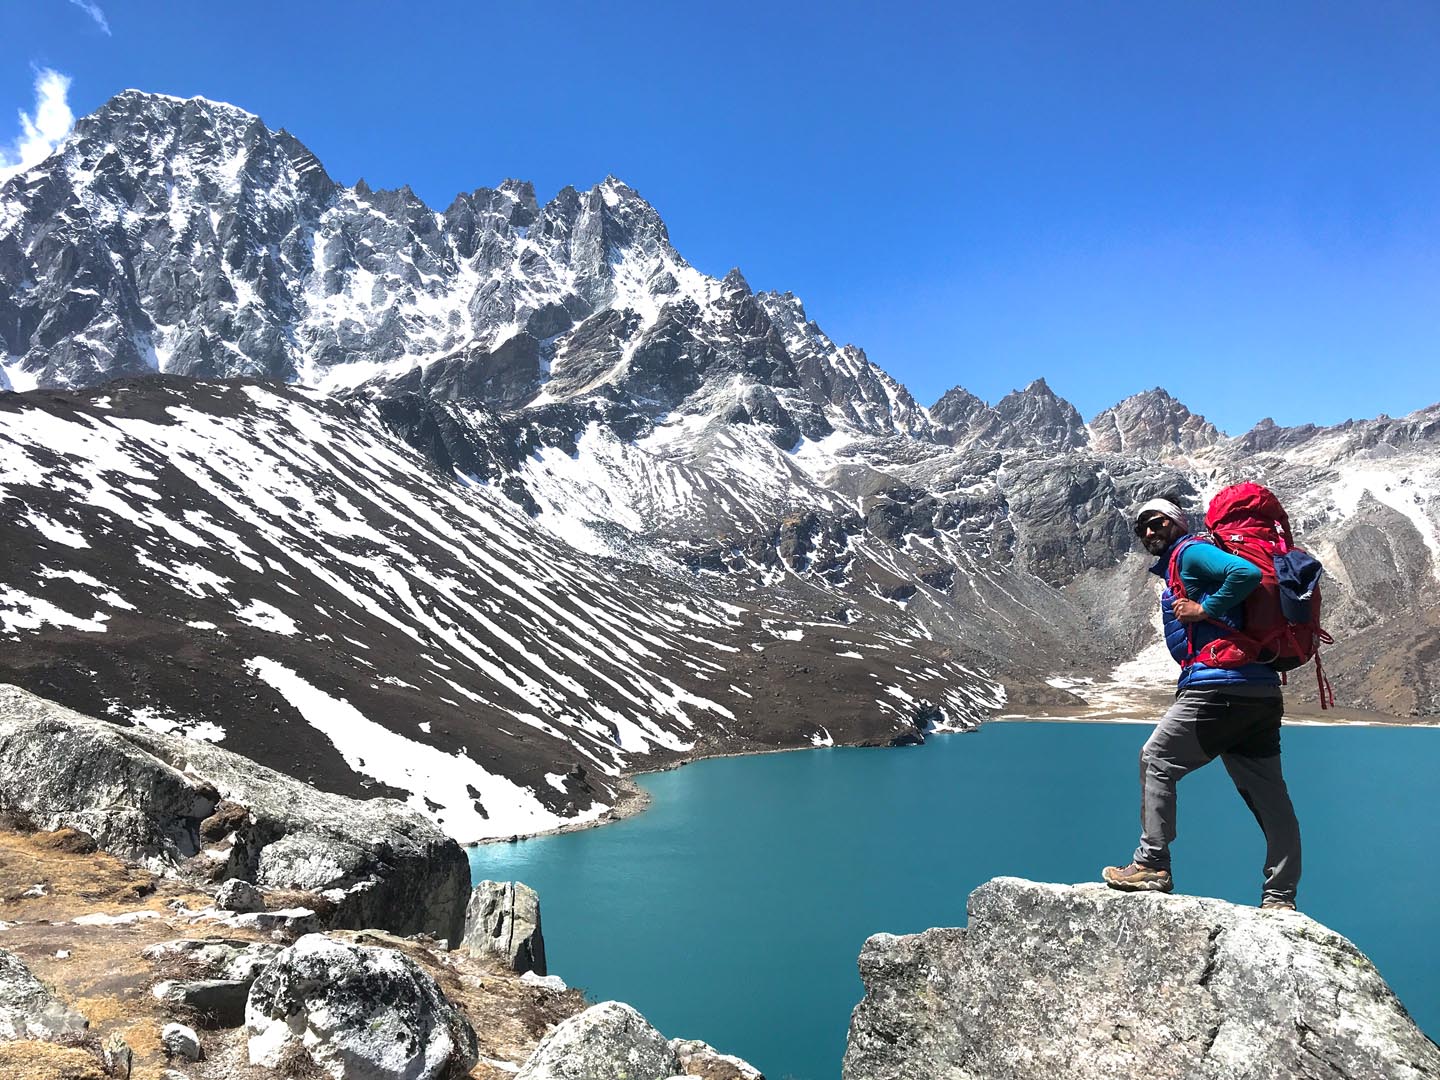 Tranquil feel of the Gokyo Lakes